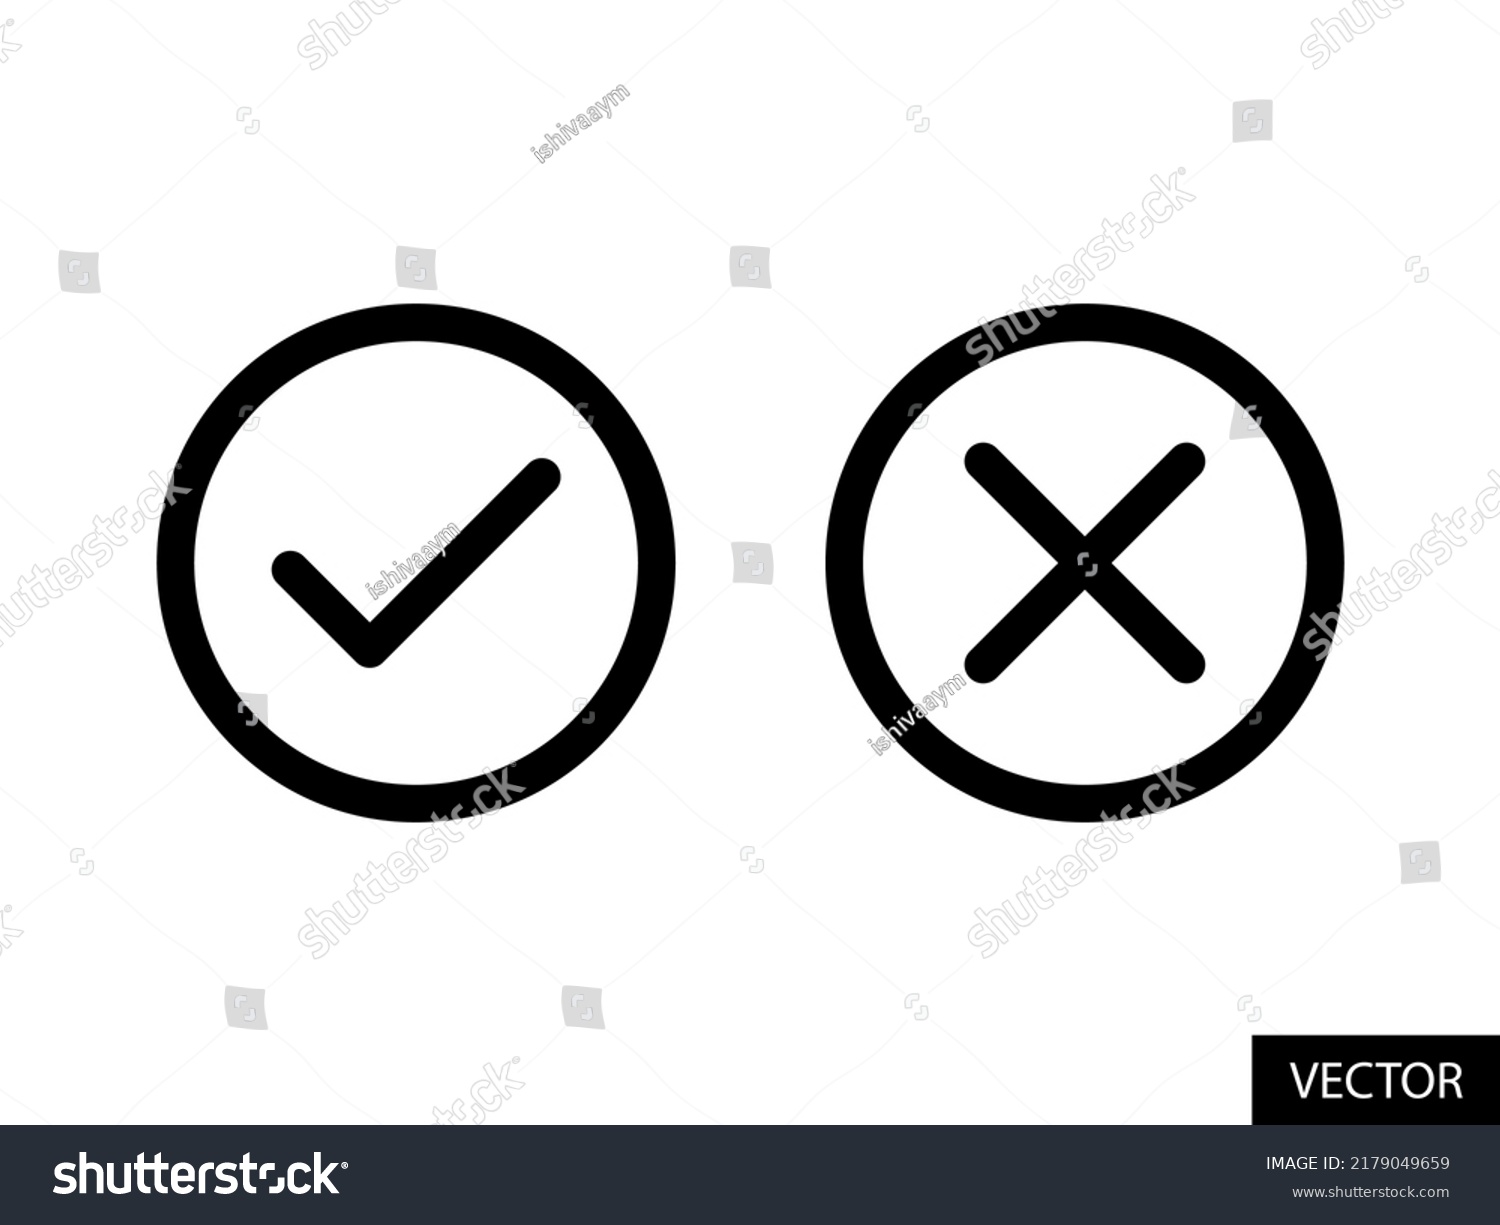 Tick and Cross checkmark vector icons in line style design for website design, app, UI, isolated on white background. Editable stroke. EPS 10 vector illustration. #2179049659